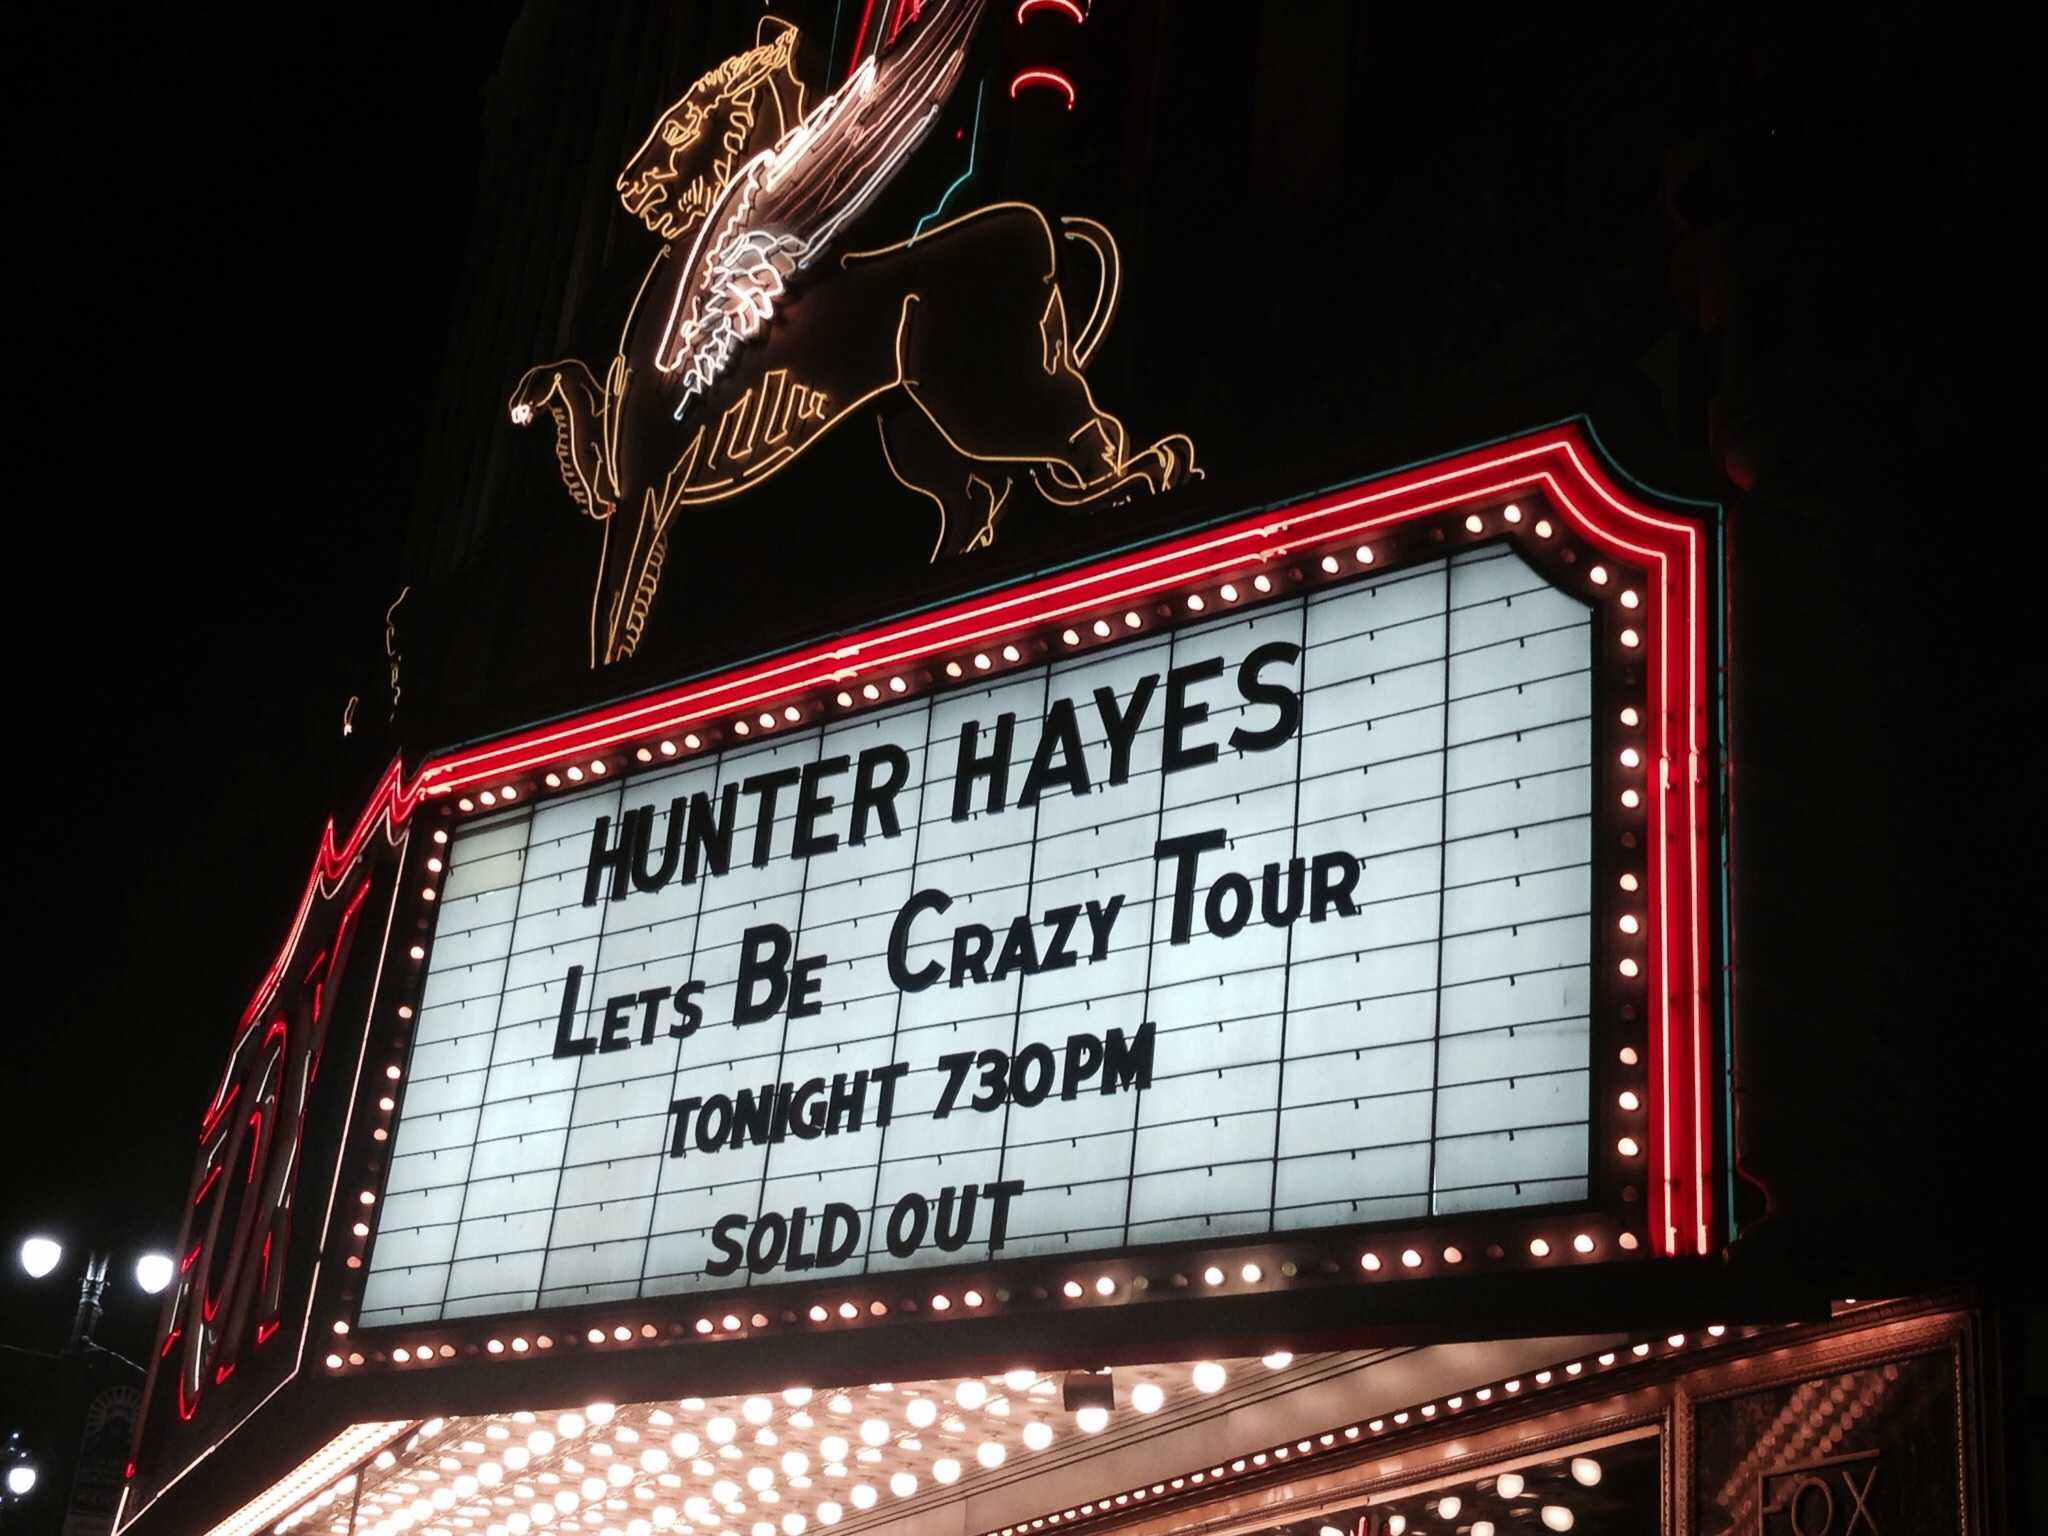 Hunter Hayes sold out Fox Theatre, which holds 2,200 seats.